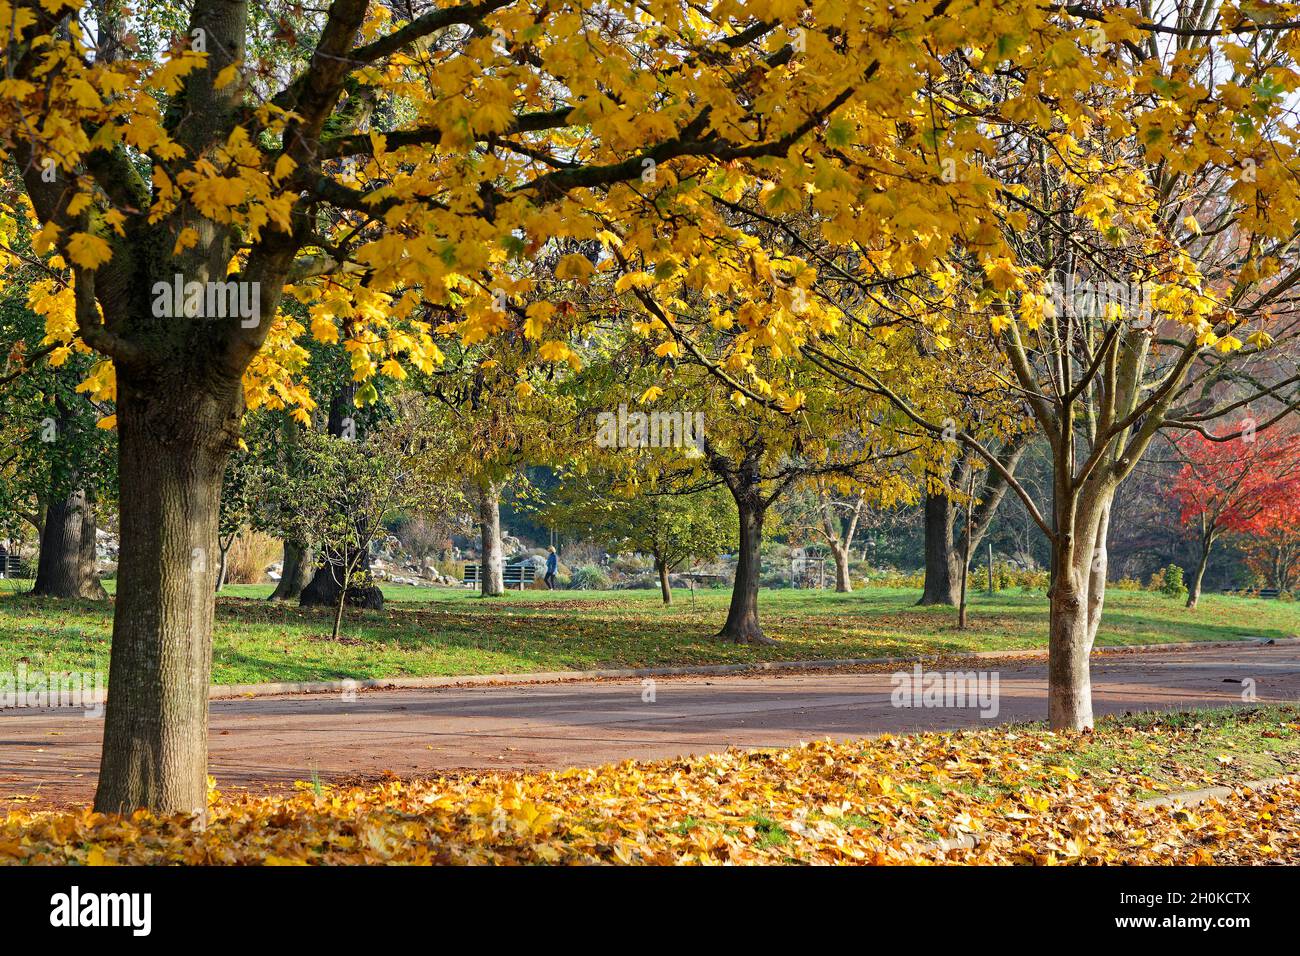 Autumn leaves have nice colors in the park Stock Photo